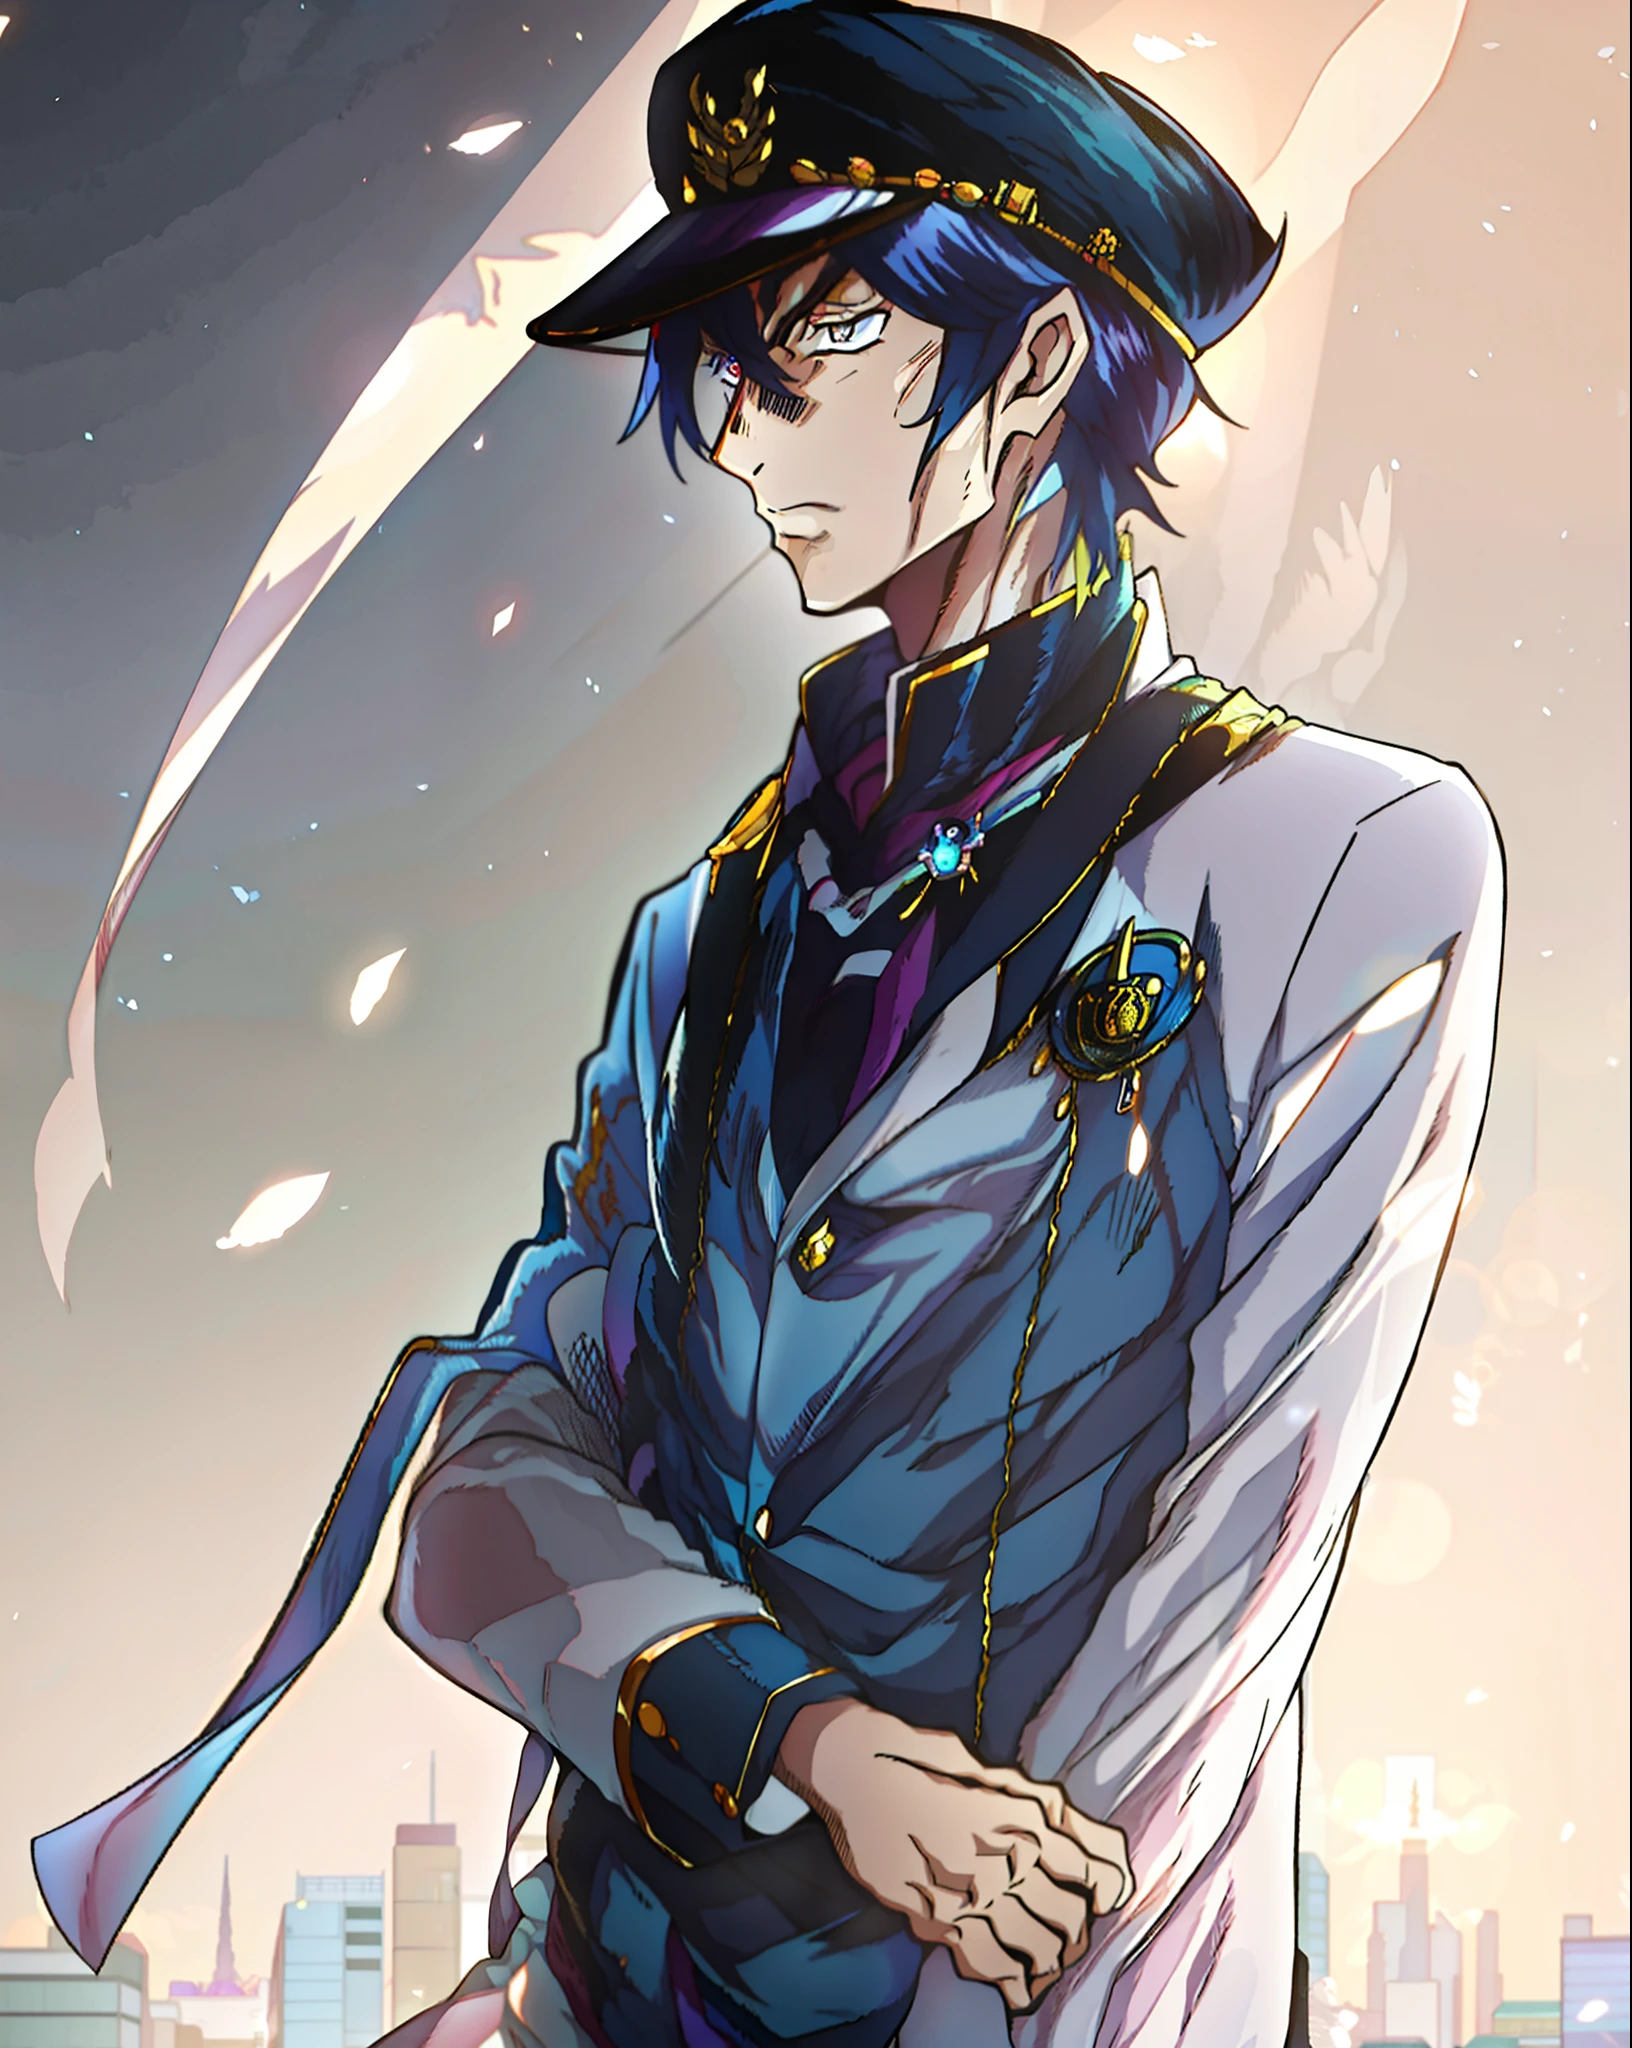 Anime characters standing in front of the city in uniform, Delicate male, Handsome anime pose, Anime handsome man, inspired by Okumura Togyu, he is wearing a top hat, inspired by Yamagata Hiro, Tall anime man with golden eyes